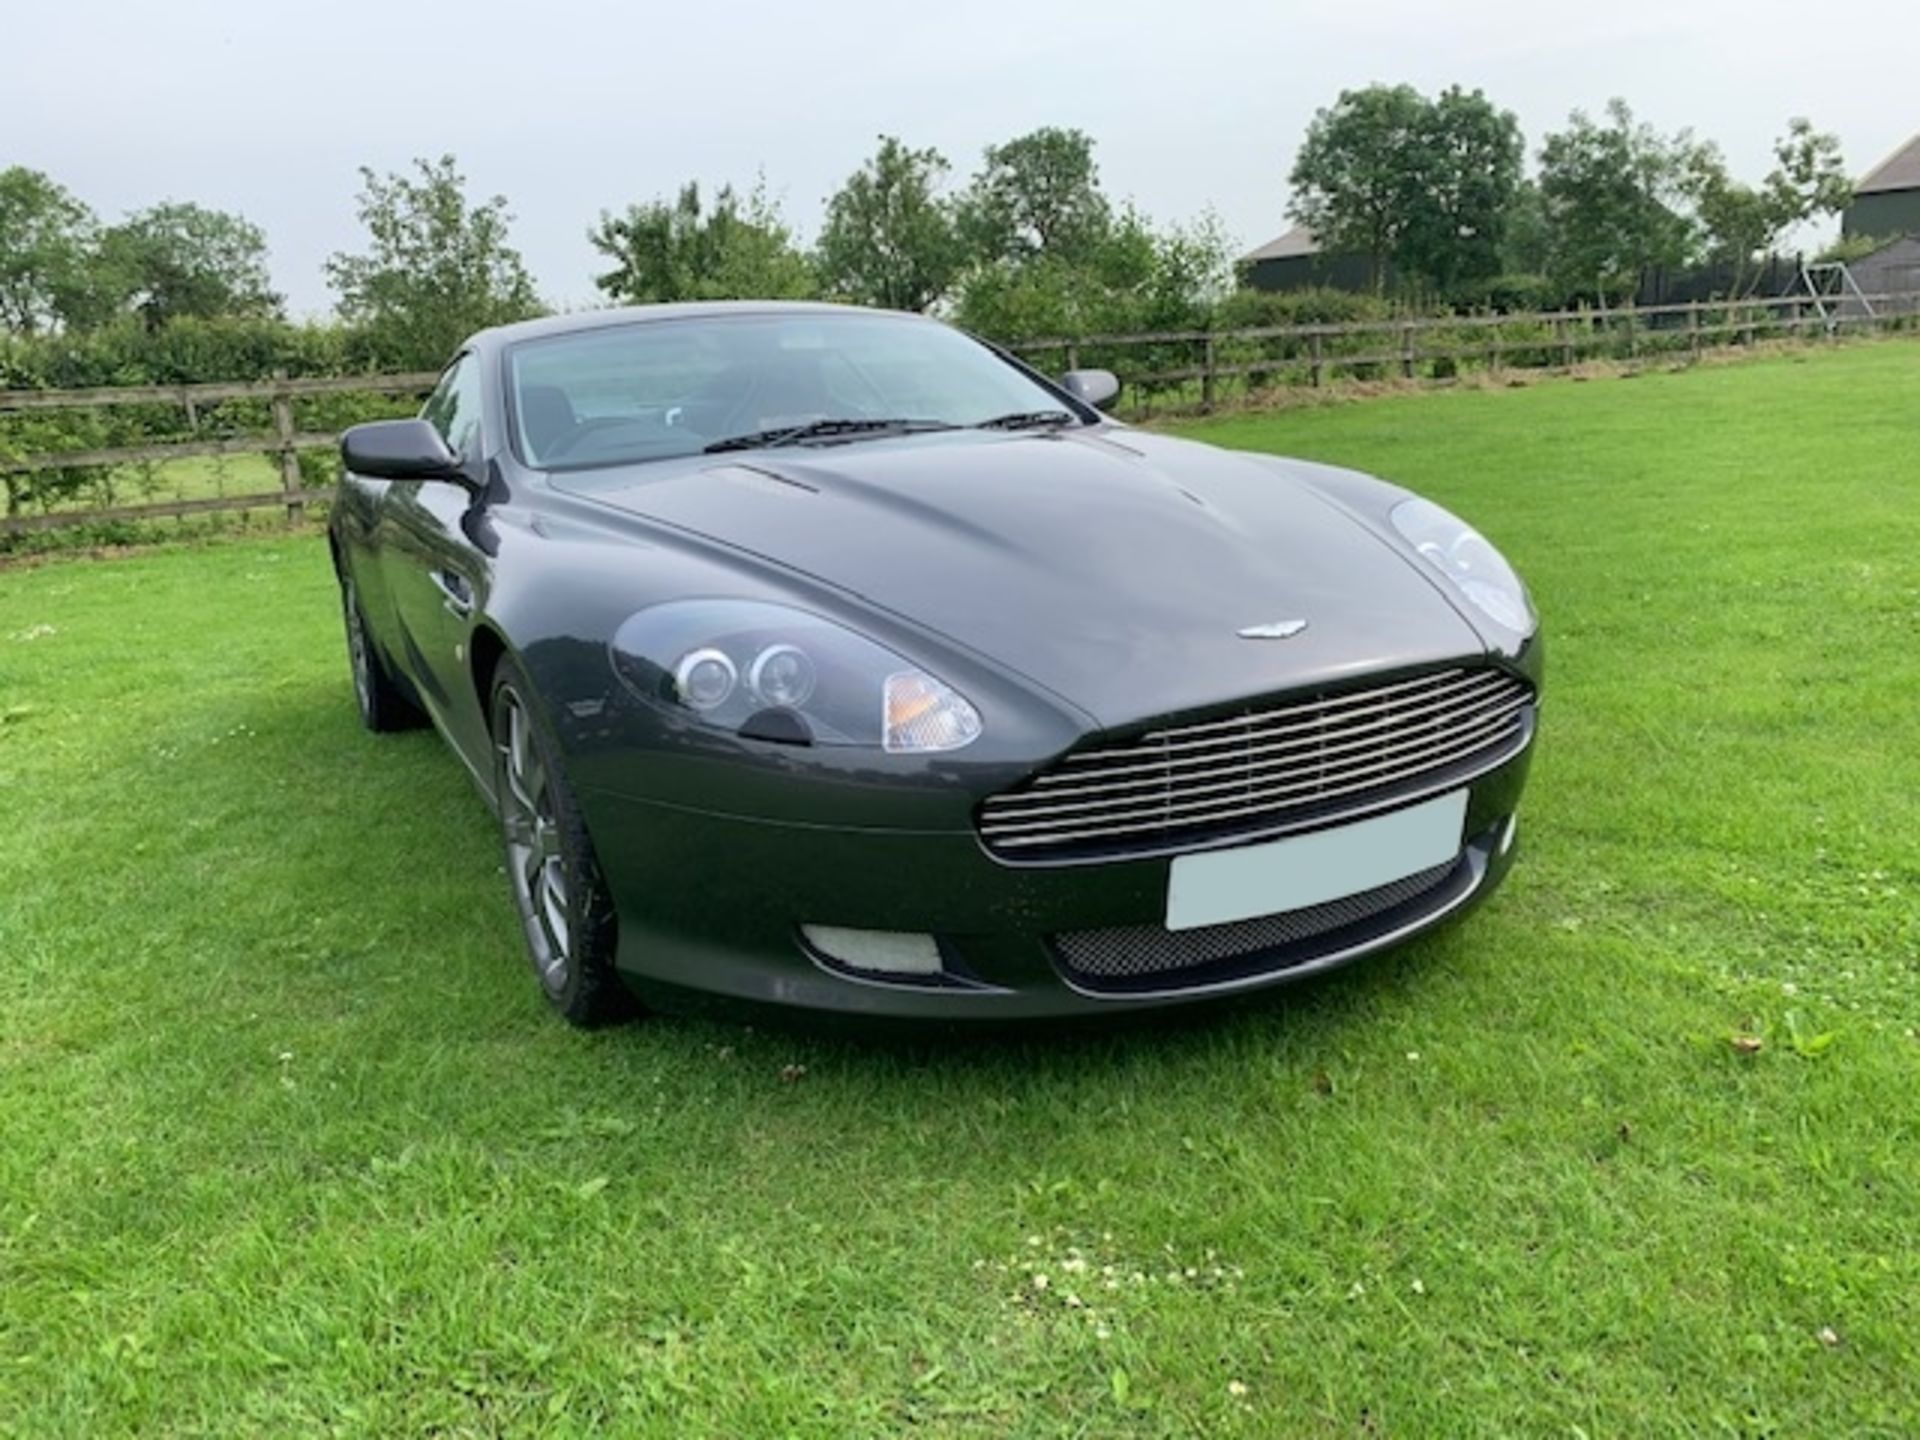 ASTON MARTIN DB9 COUPE V12 2DR TOUCHTRONIC AUTO (5935 cc) - Image 3 of 13